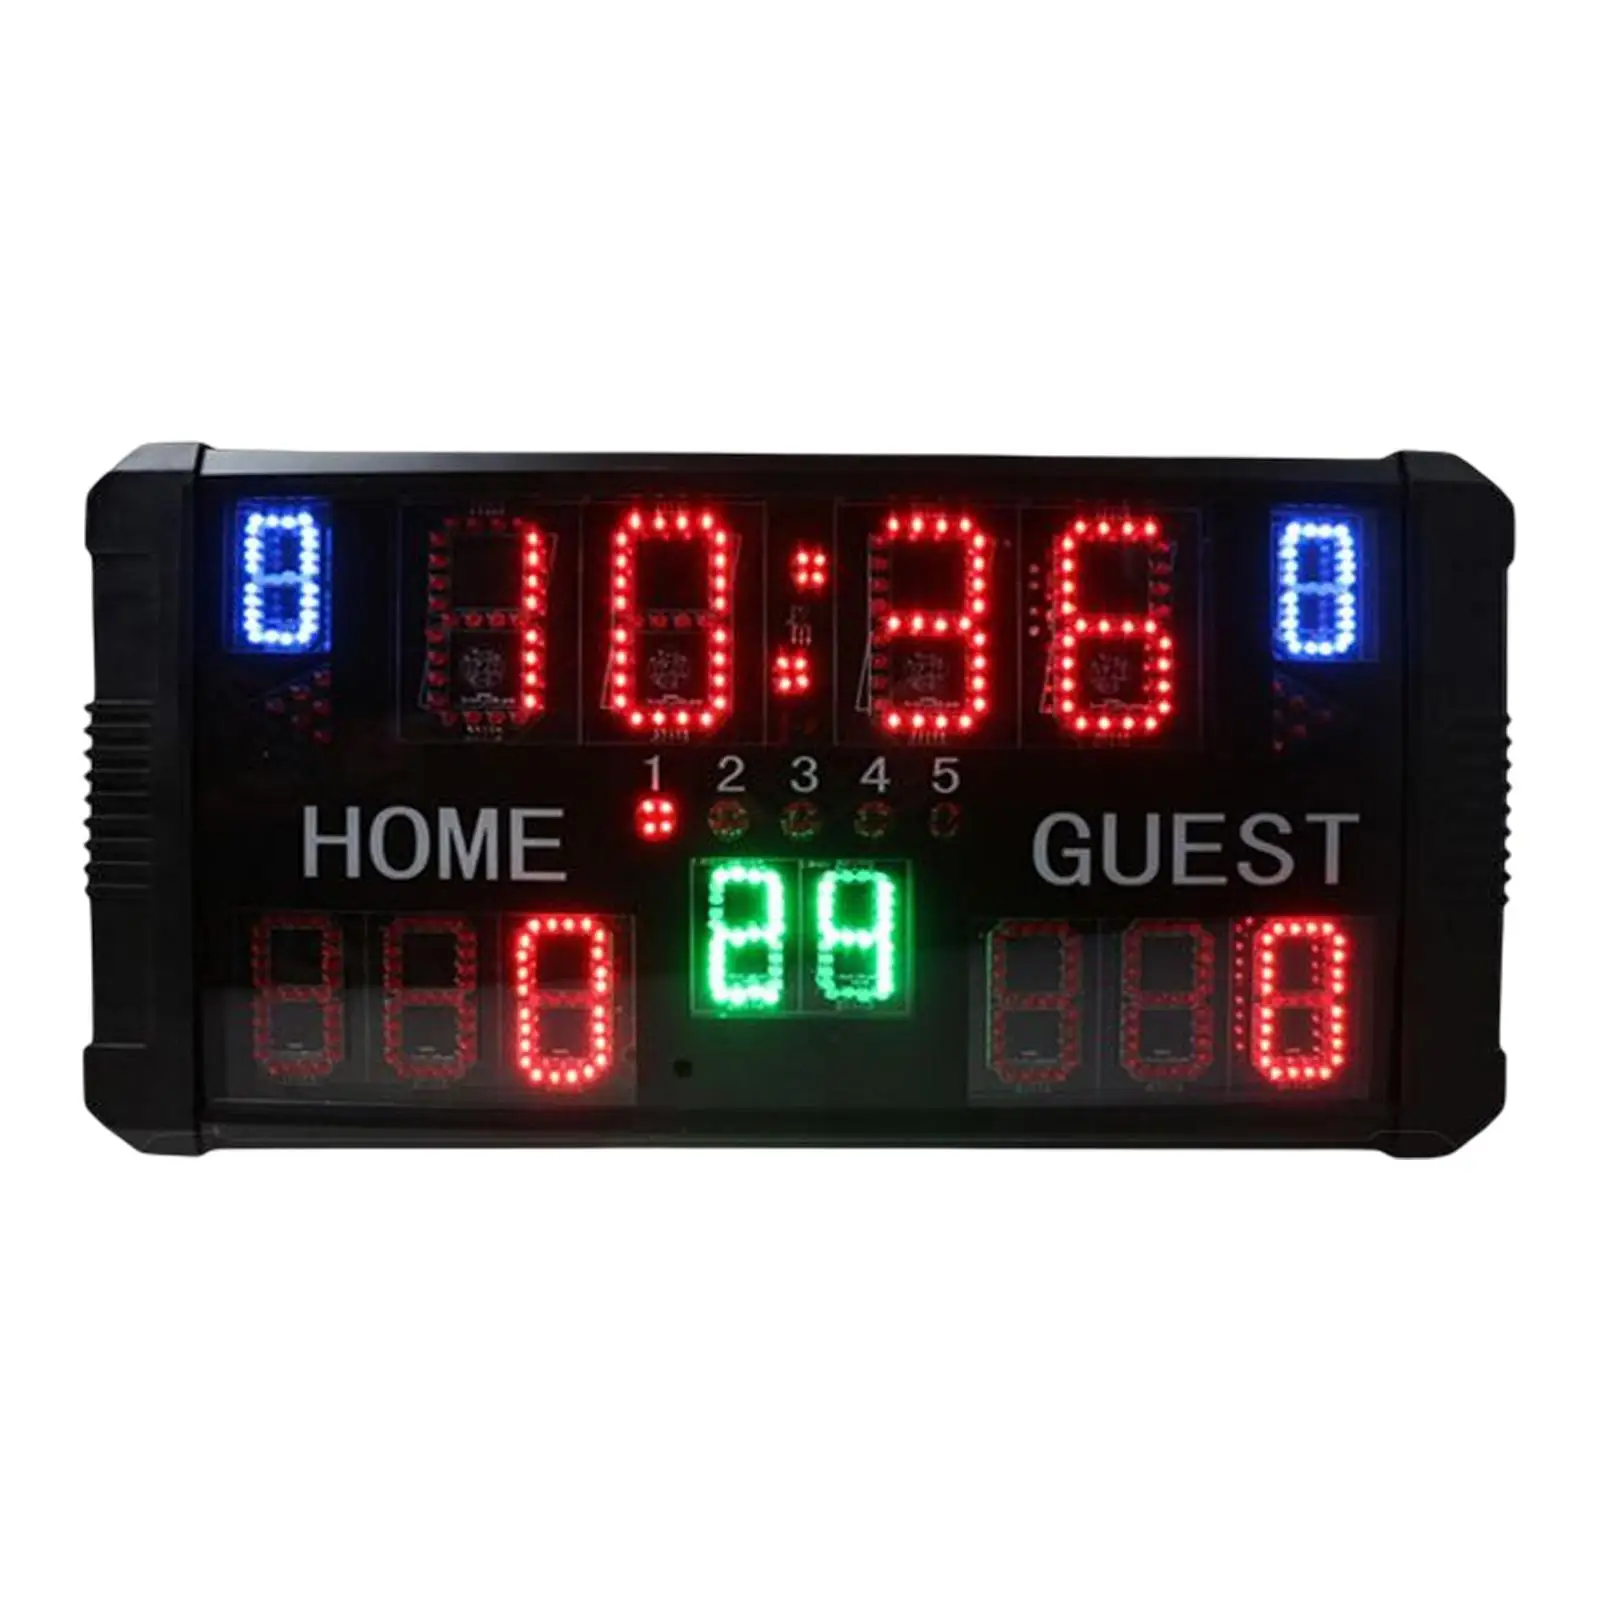 Portable Electronic Digital Scoreboard Counting with Remote Wall Mount Indoor Basketball Scoreboard for Sports Volleyball Tennis